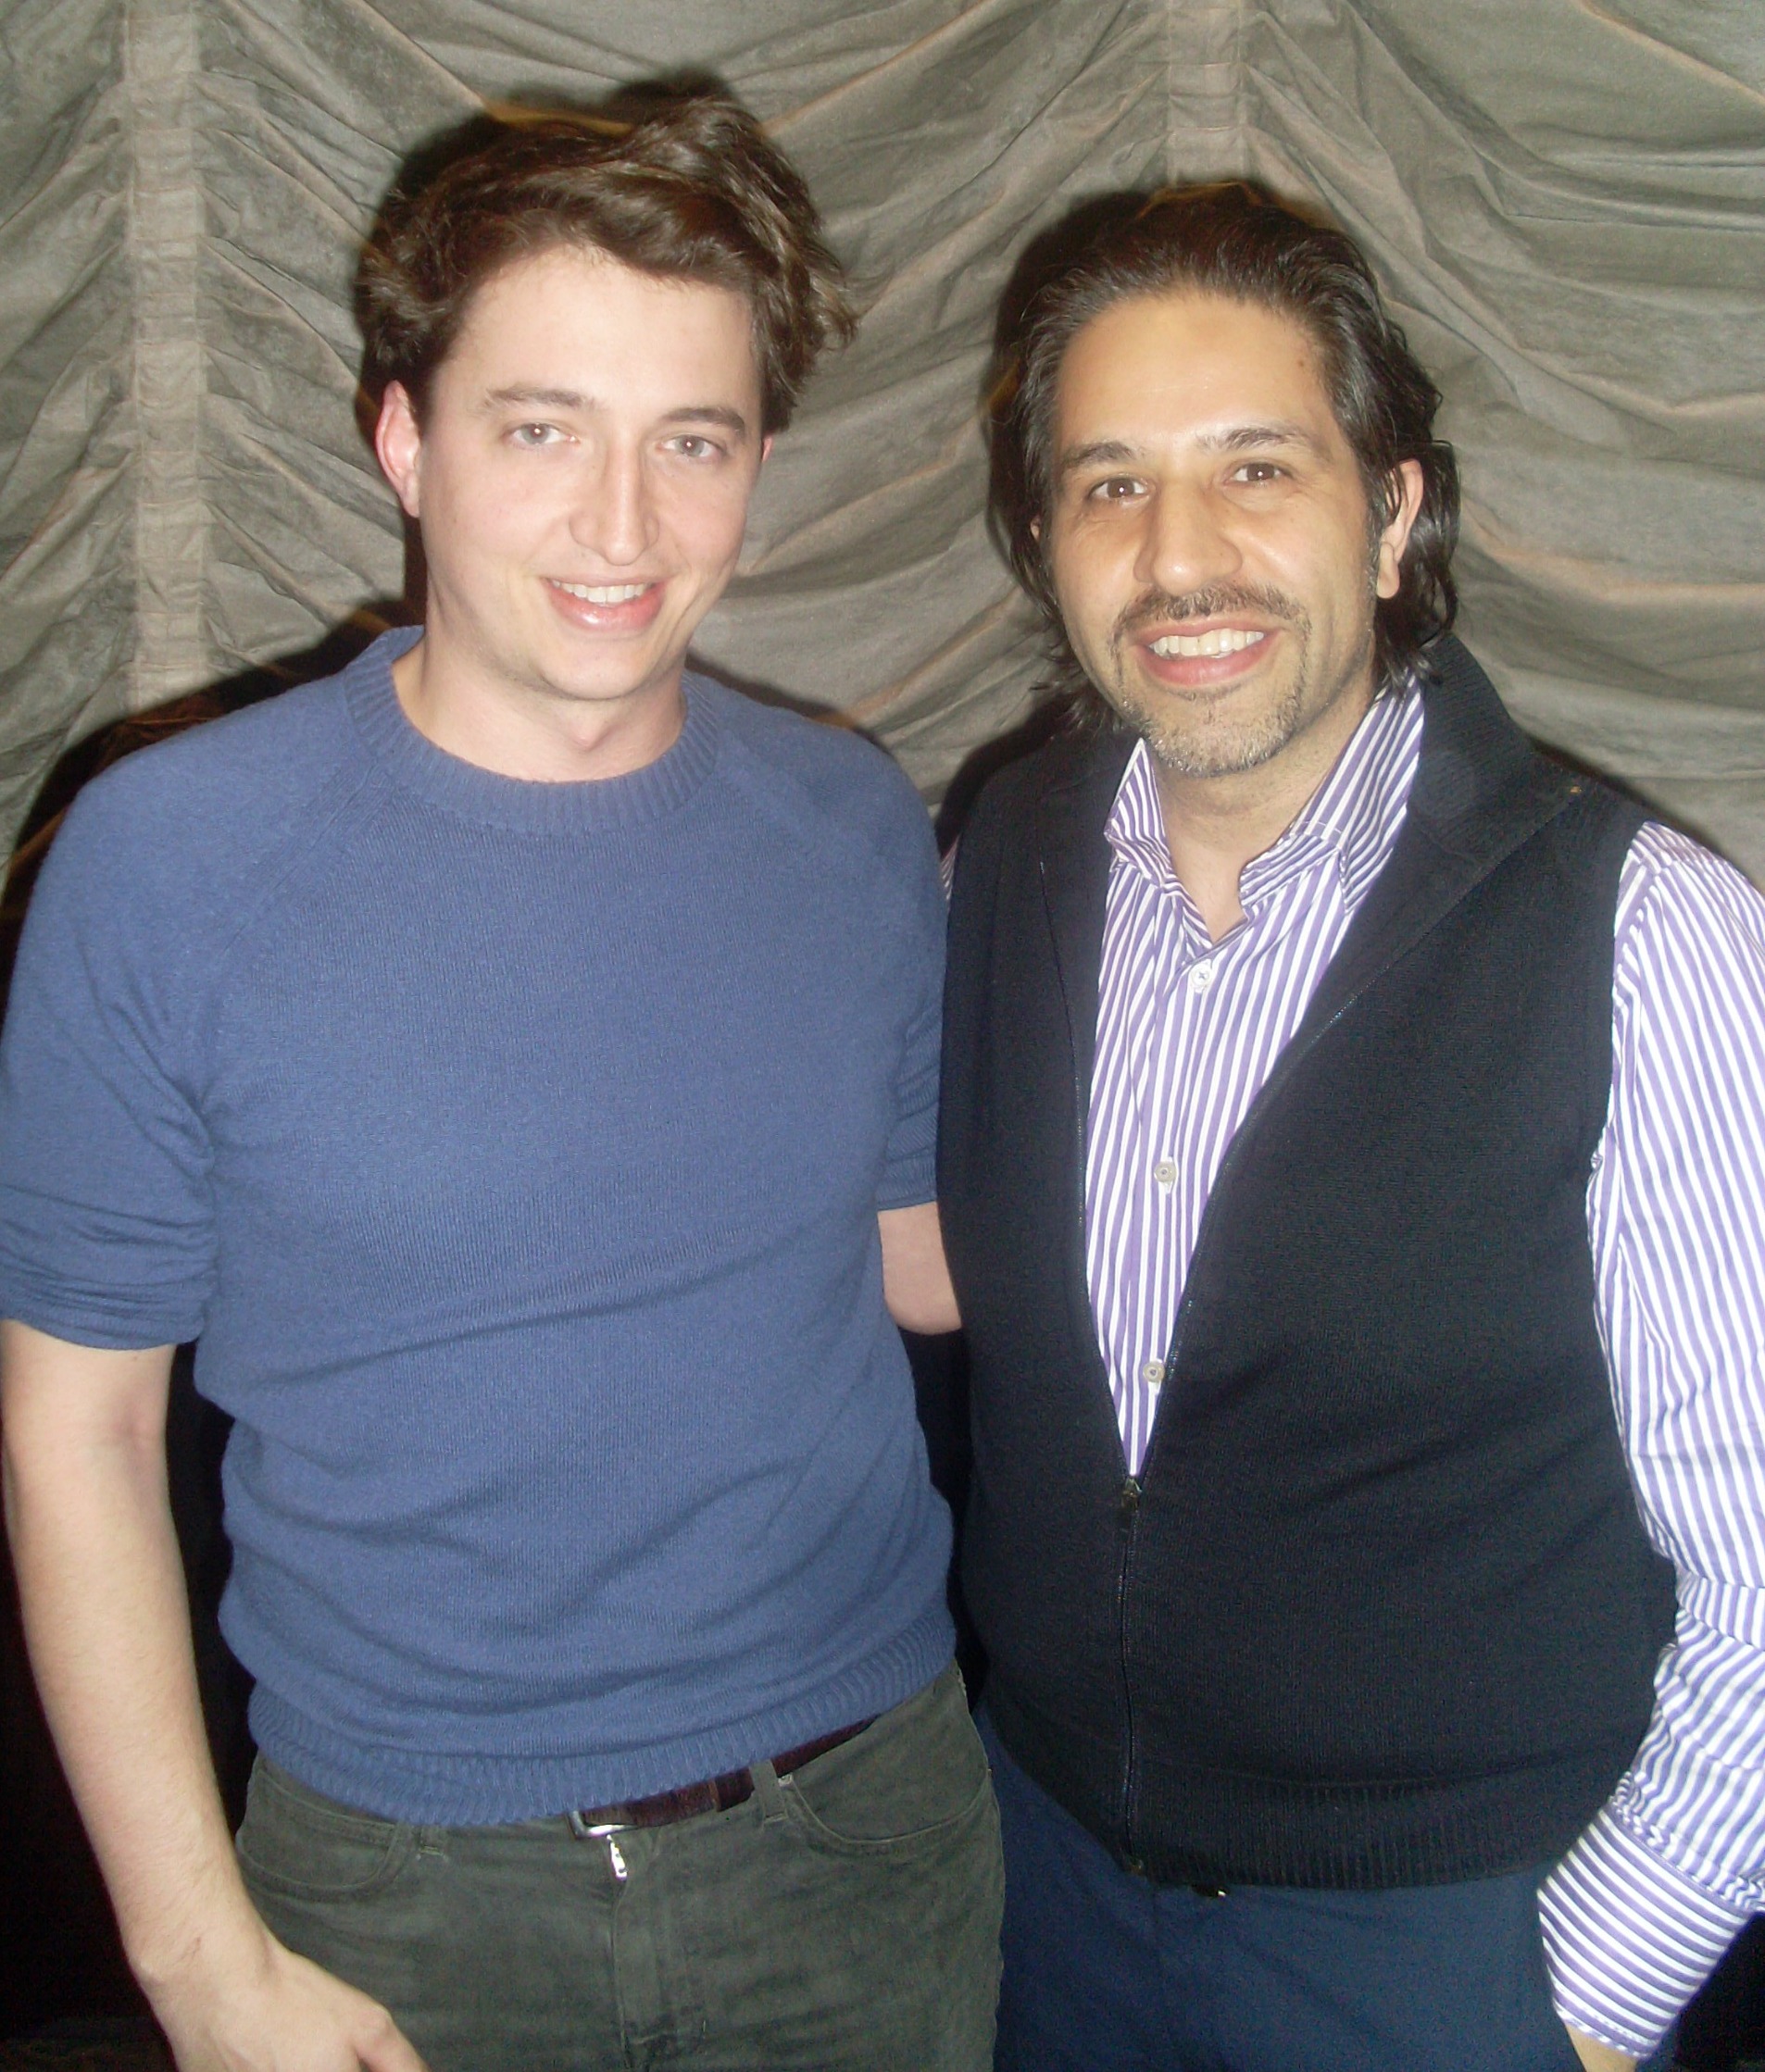 with Benh Zeitlin - Director of Beasts of the Southern Wild